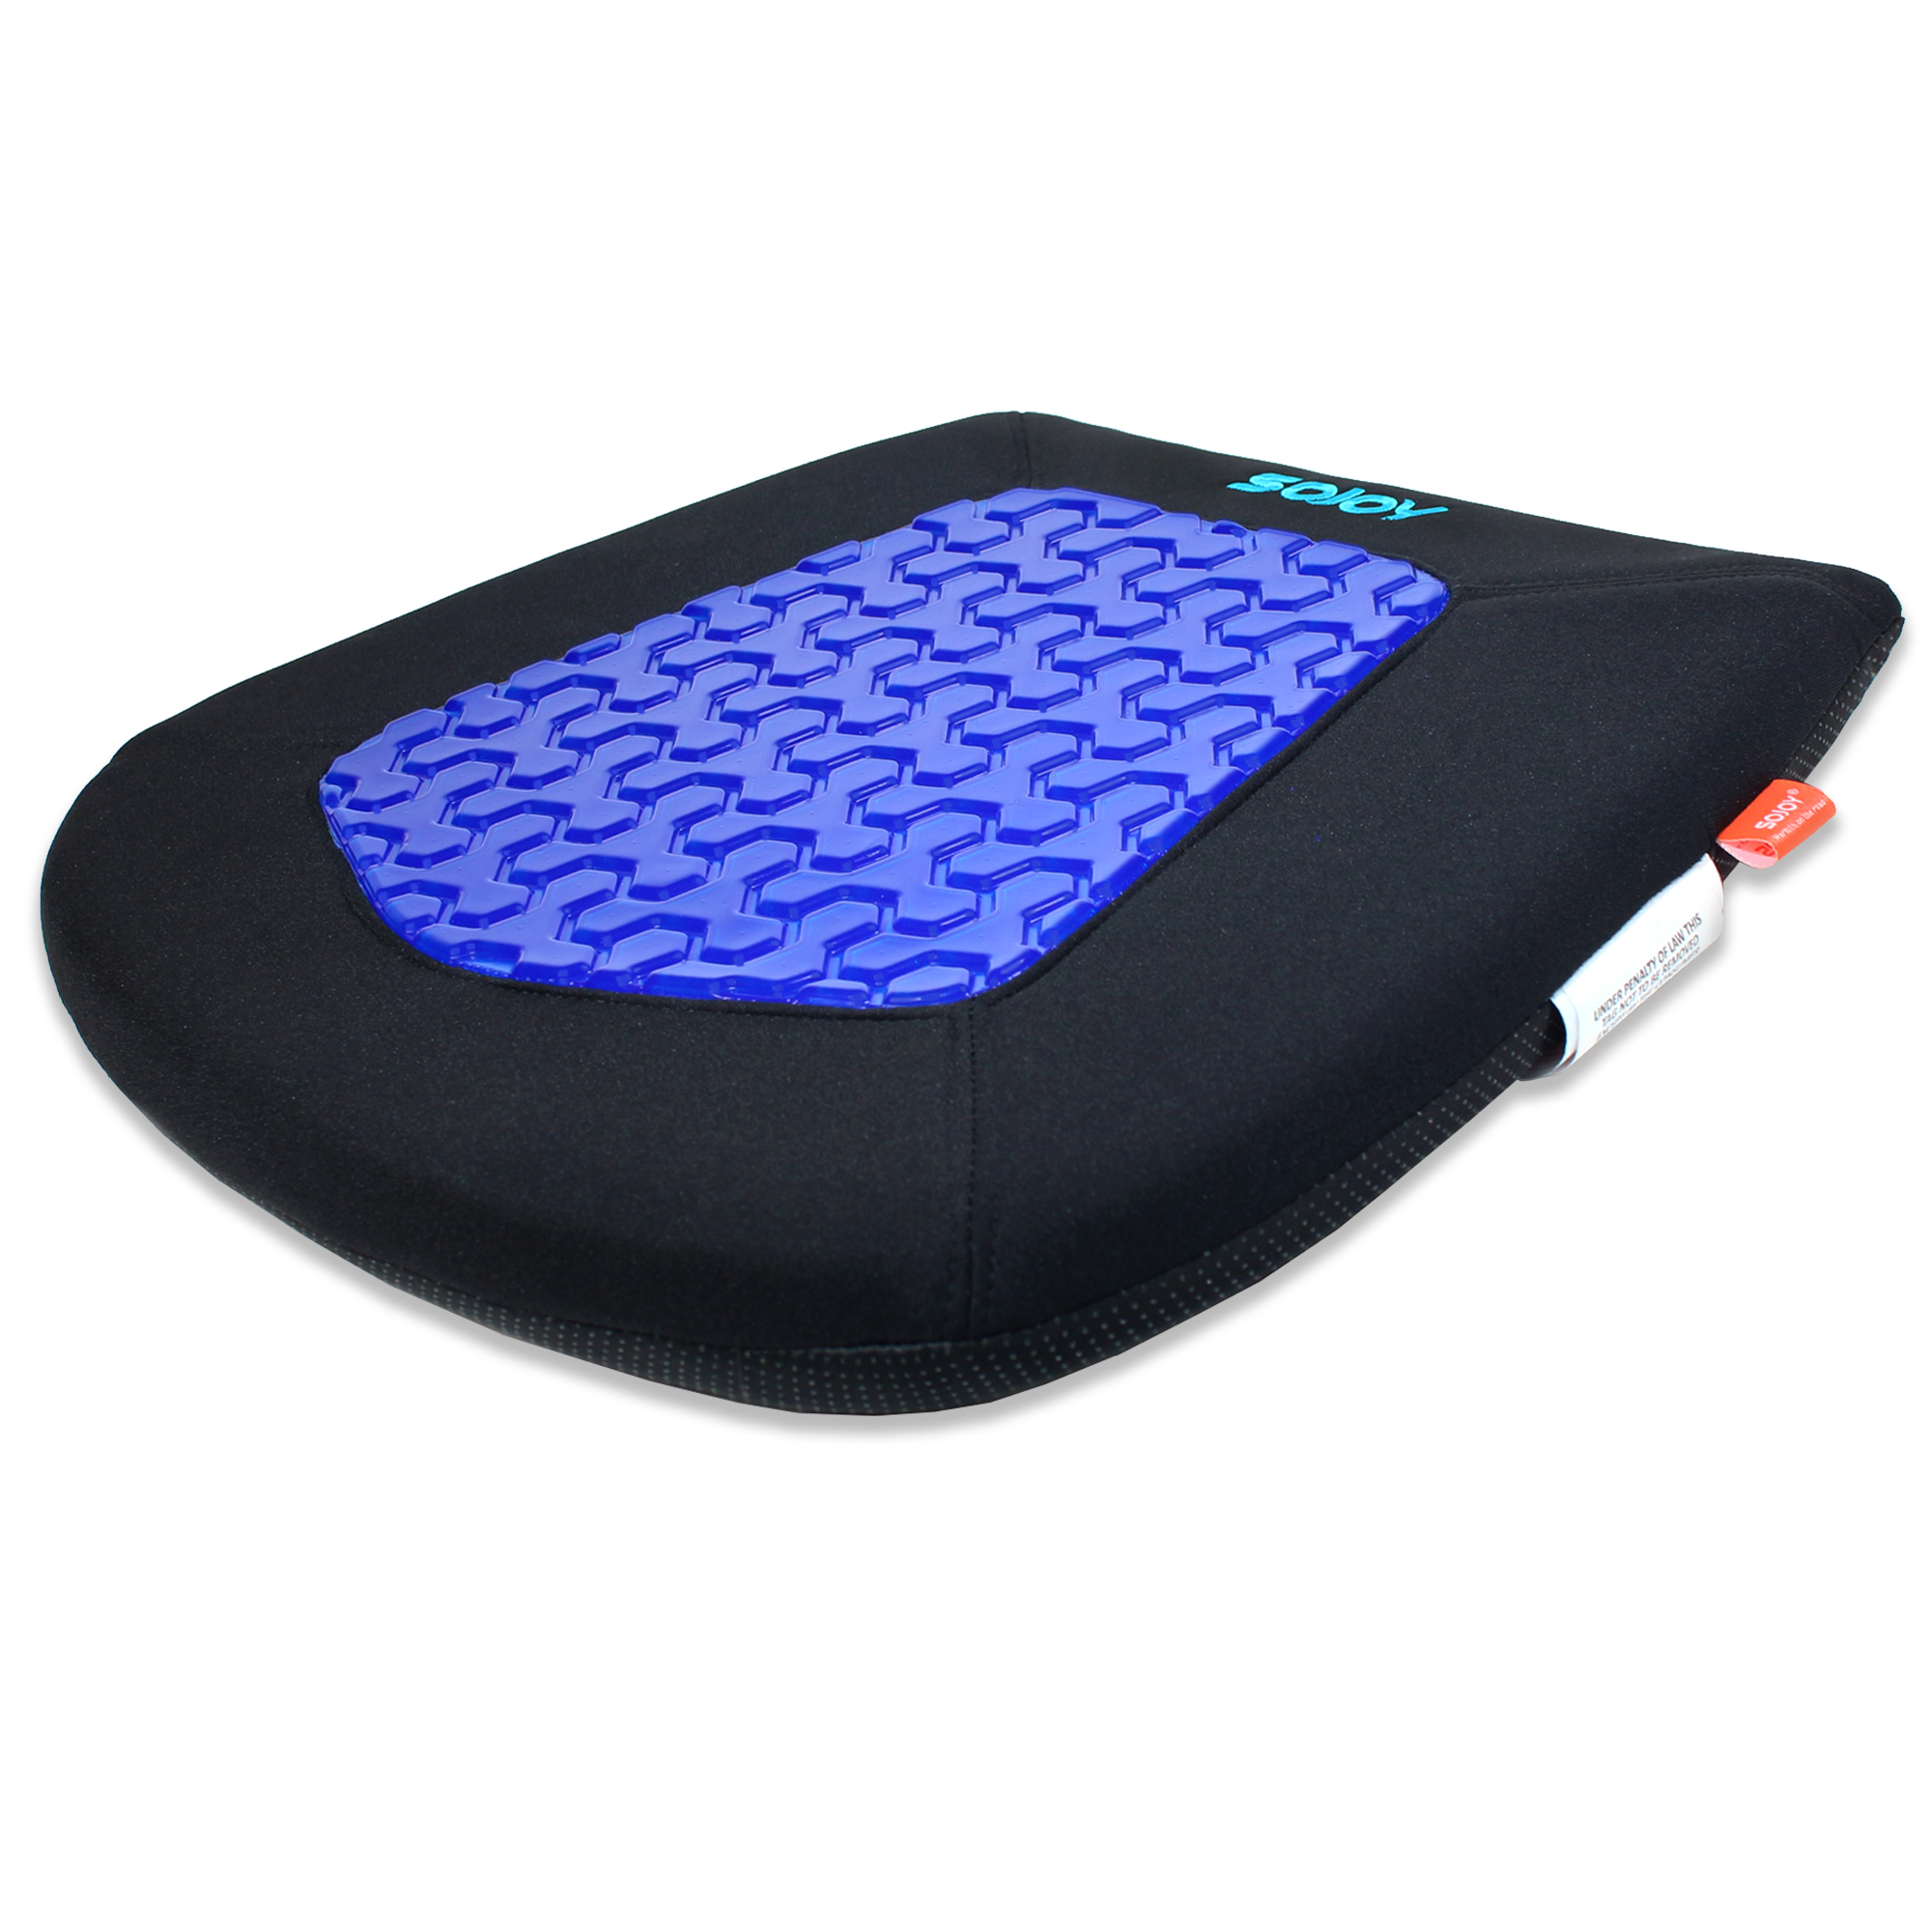 Sojoy Purple Gel Seat Cushion and Lumbar Support Pillow - Online Shopping  for Car Heated Blankets,Heated Seat Cushion,Car Gel Cushions,Free Shipping  From USA